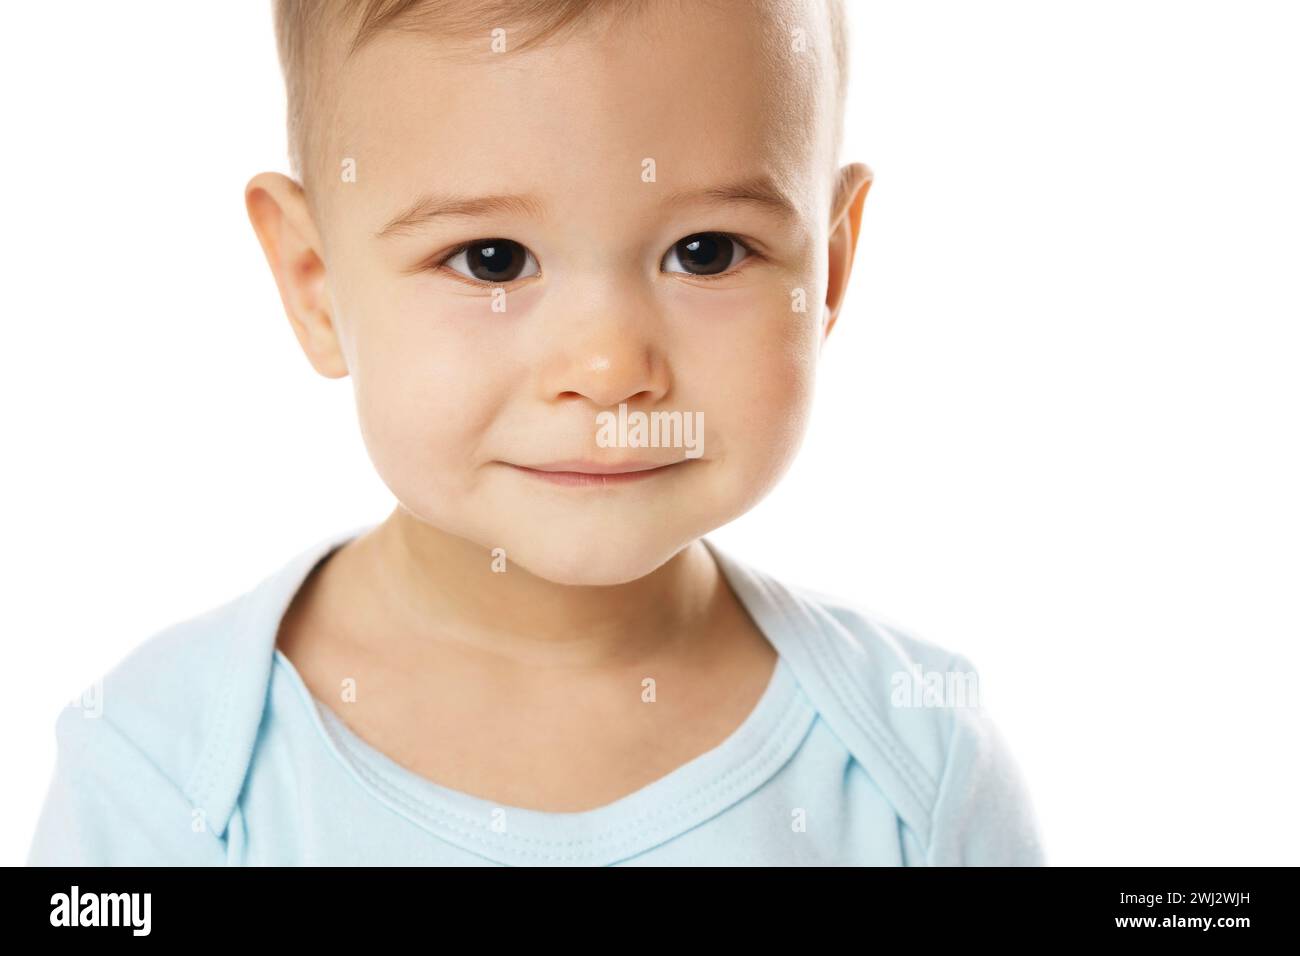 Closeuo shot of smiling face of little boy in romper. Stock Photo